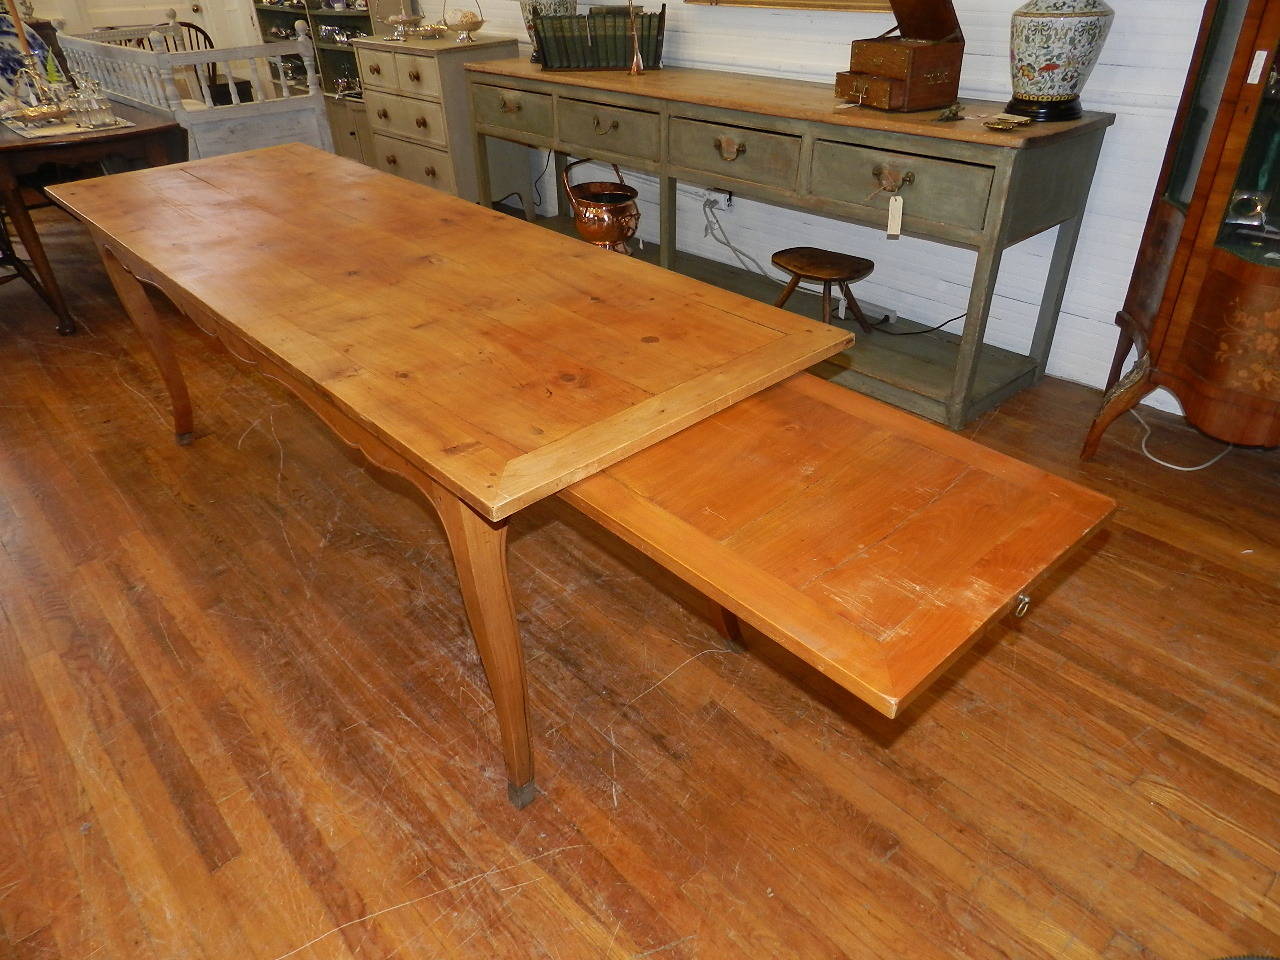 French cherry table with pull-out extensions. Shaped and carved apron supported upon French shaped cabriole legs. All joints are pinned.